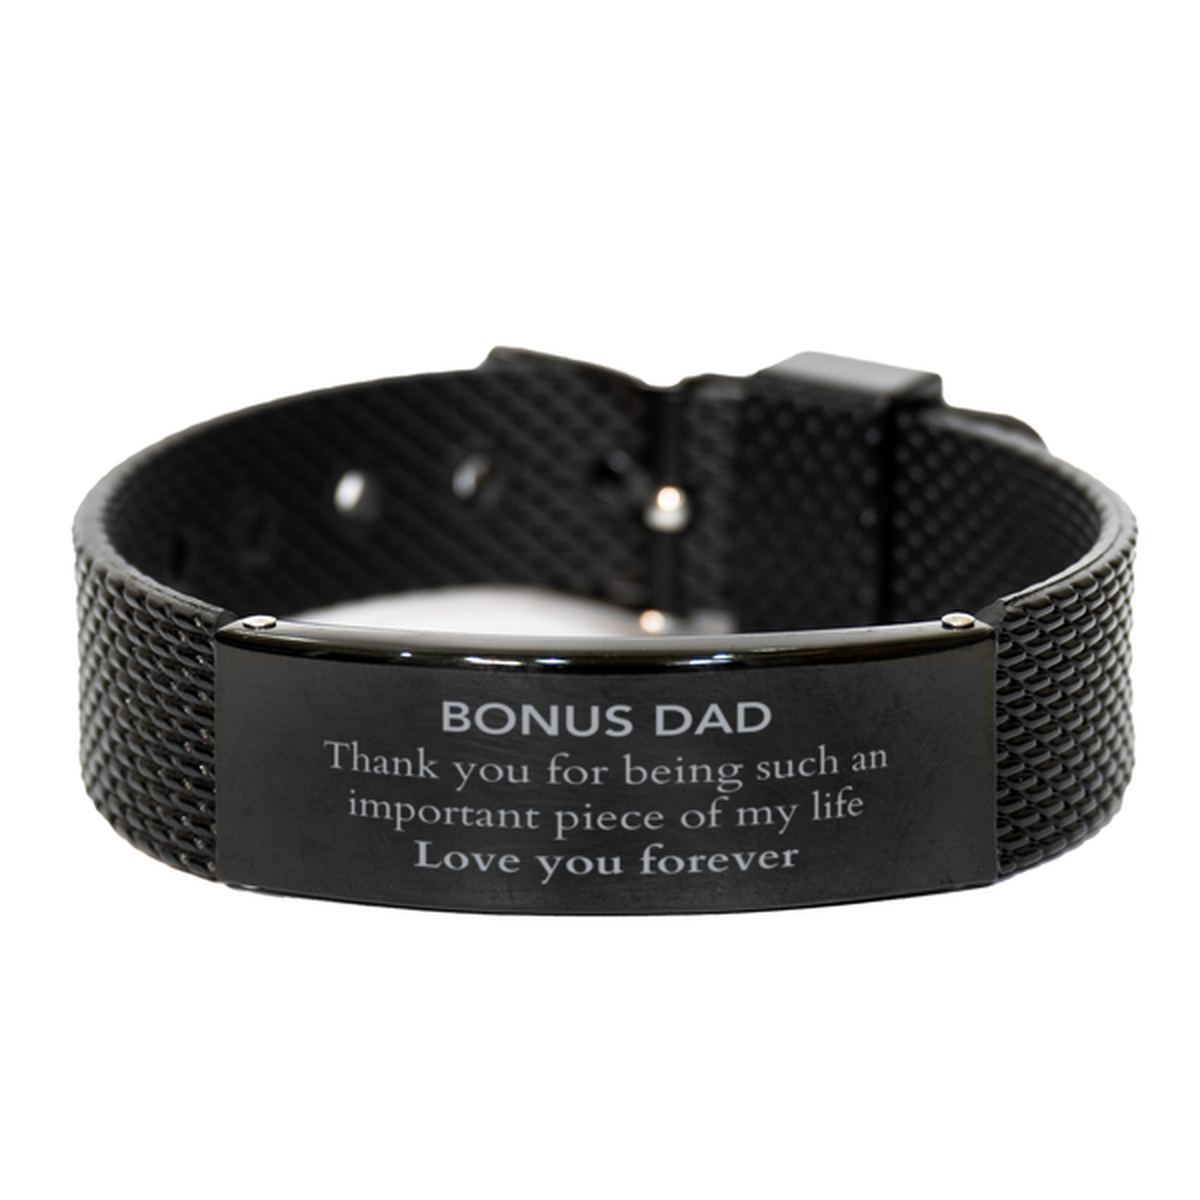 Appropriate Bonus Dad Black Shark Mesh Bracelet Epic Birthday Gifts for Bonus Dad Thank you for being such an important piece of my life Bonus Dad Christmas Mothers Fathers Day